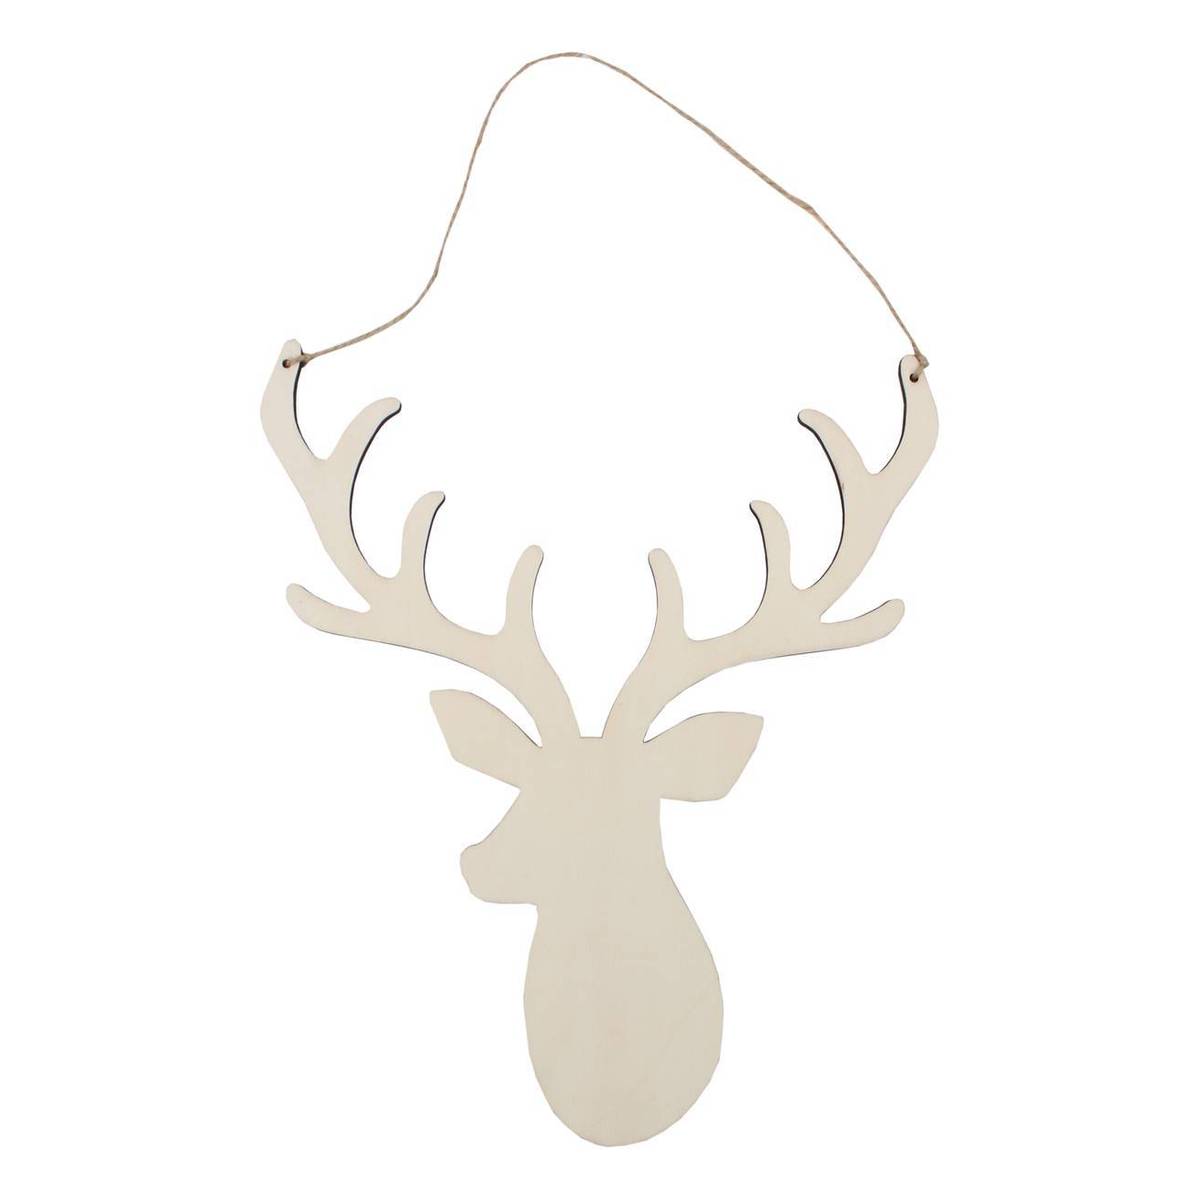 Buy Wooden Stag Head Hanging Decoration 30cm for GBP 2.00 | Hobbycraft UK